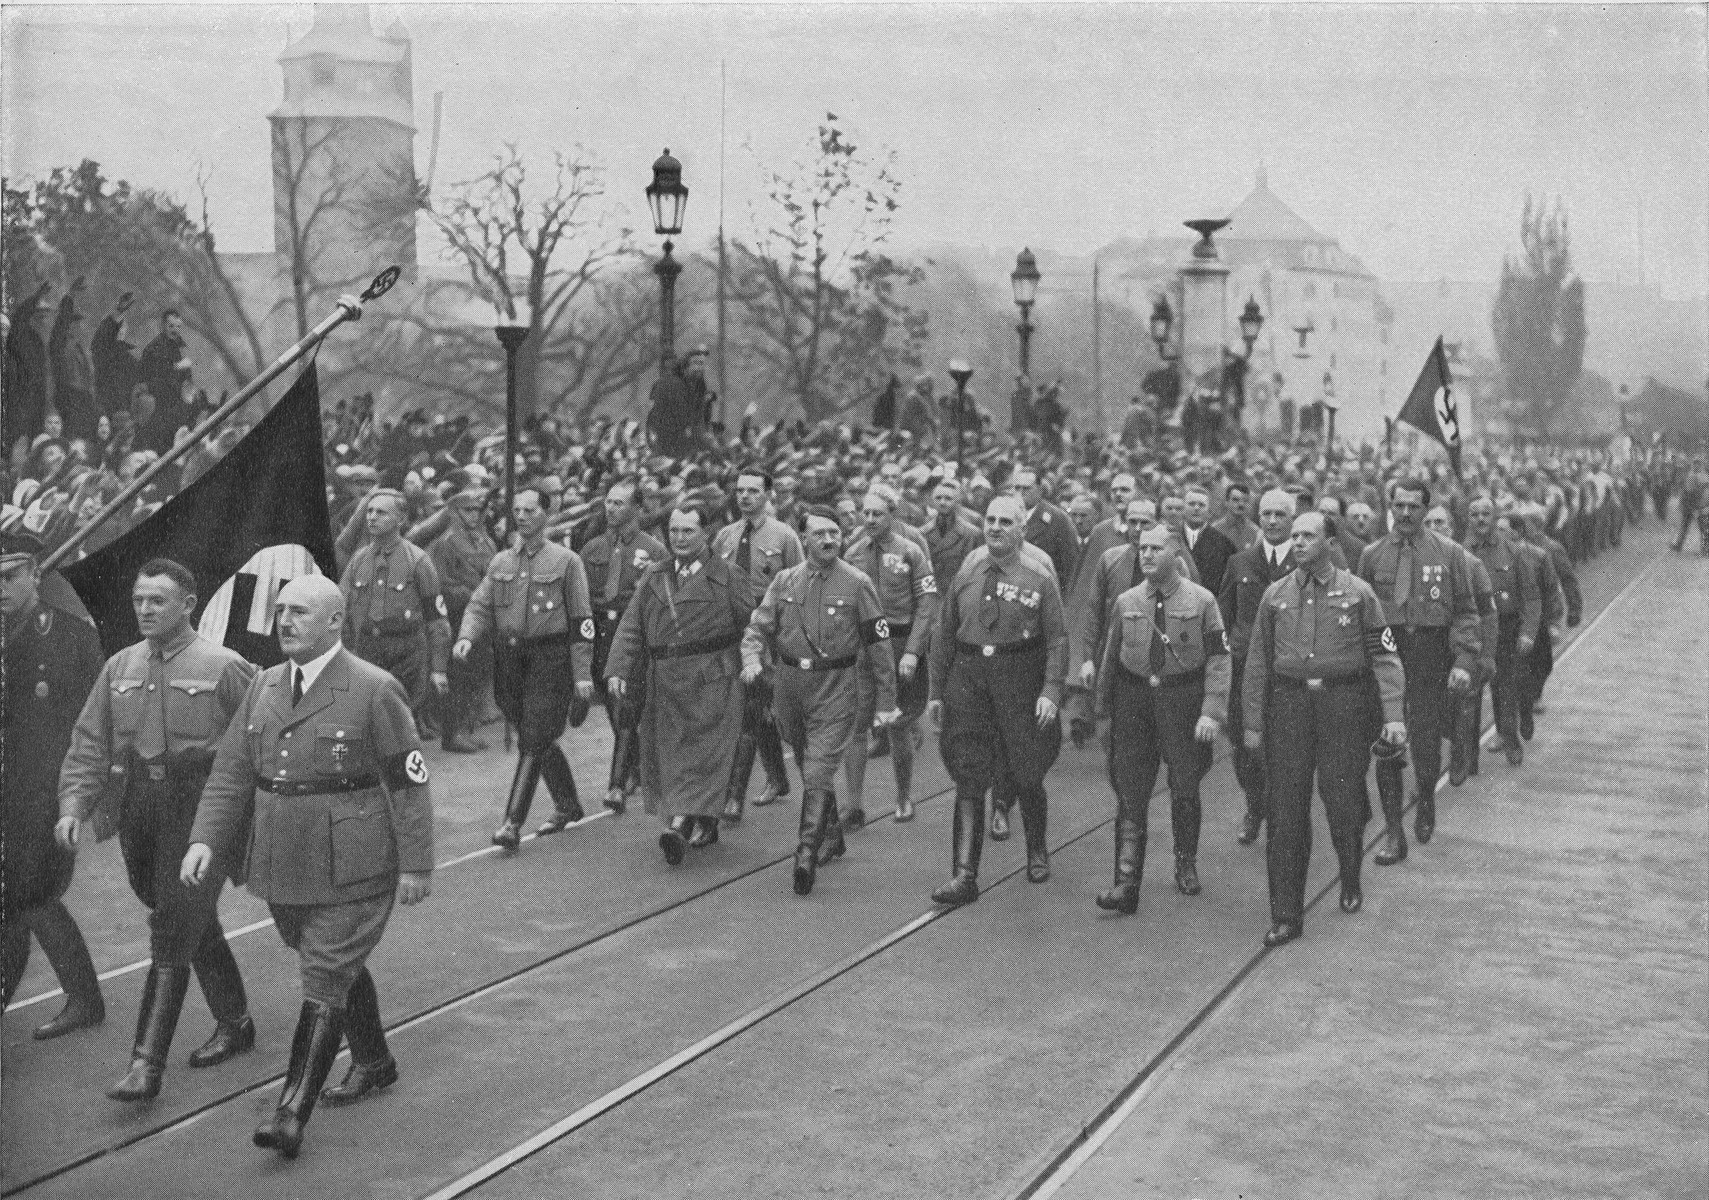 Adolf Hitler (center, front row) and Hermann Goering (third from left, front row) lead a march through the streets of Munich to commemorate the November 8-9, 1923 Beer Hall Putsch. Julius Streicher marches with the Nazi colors (lower left corner, third from left).